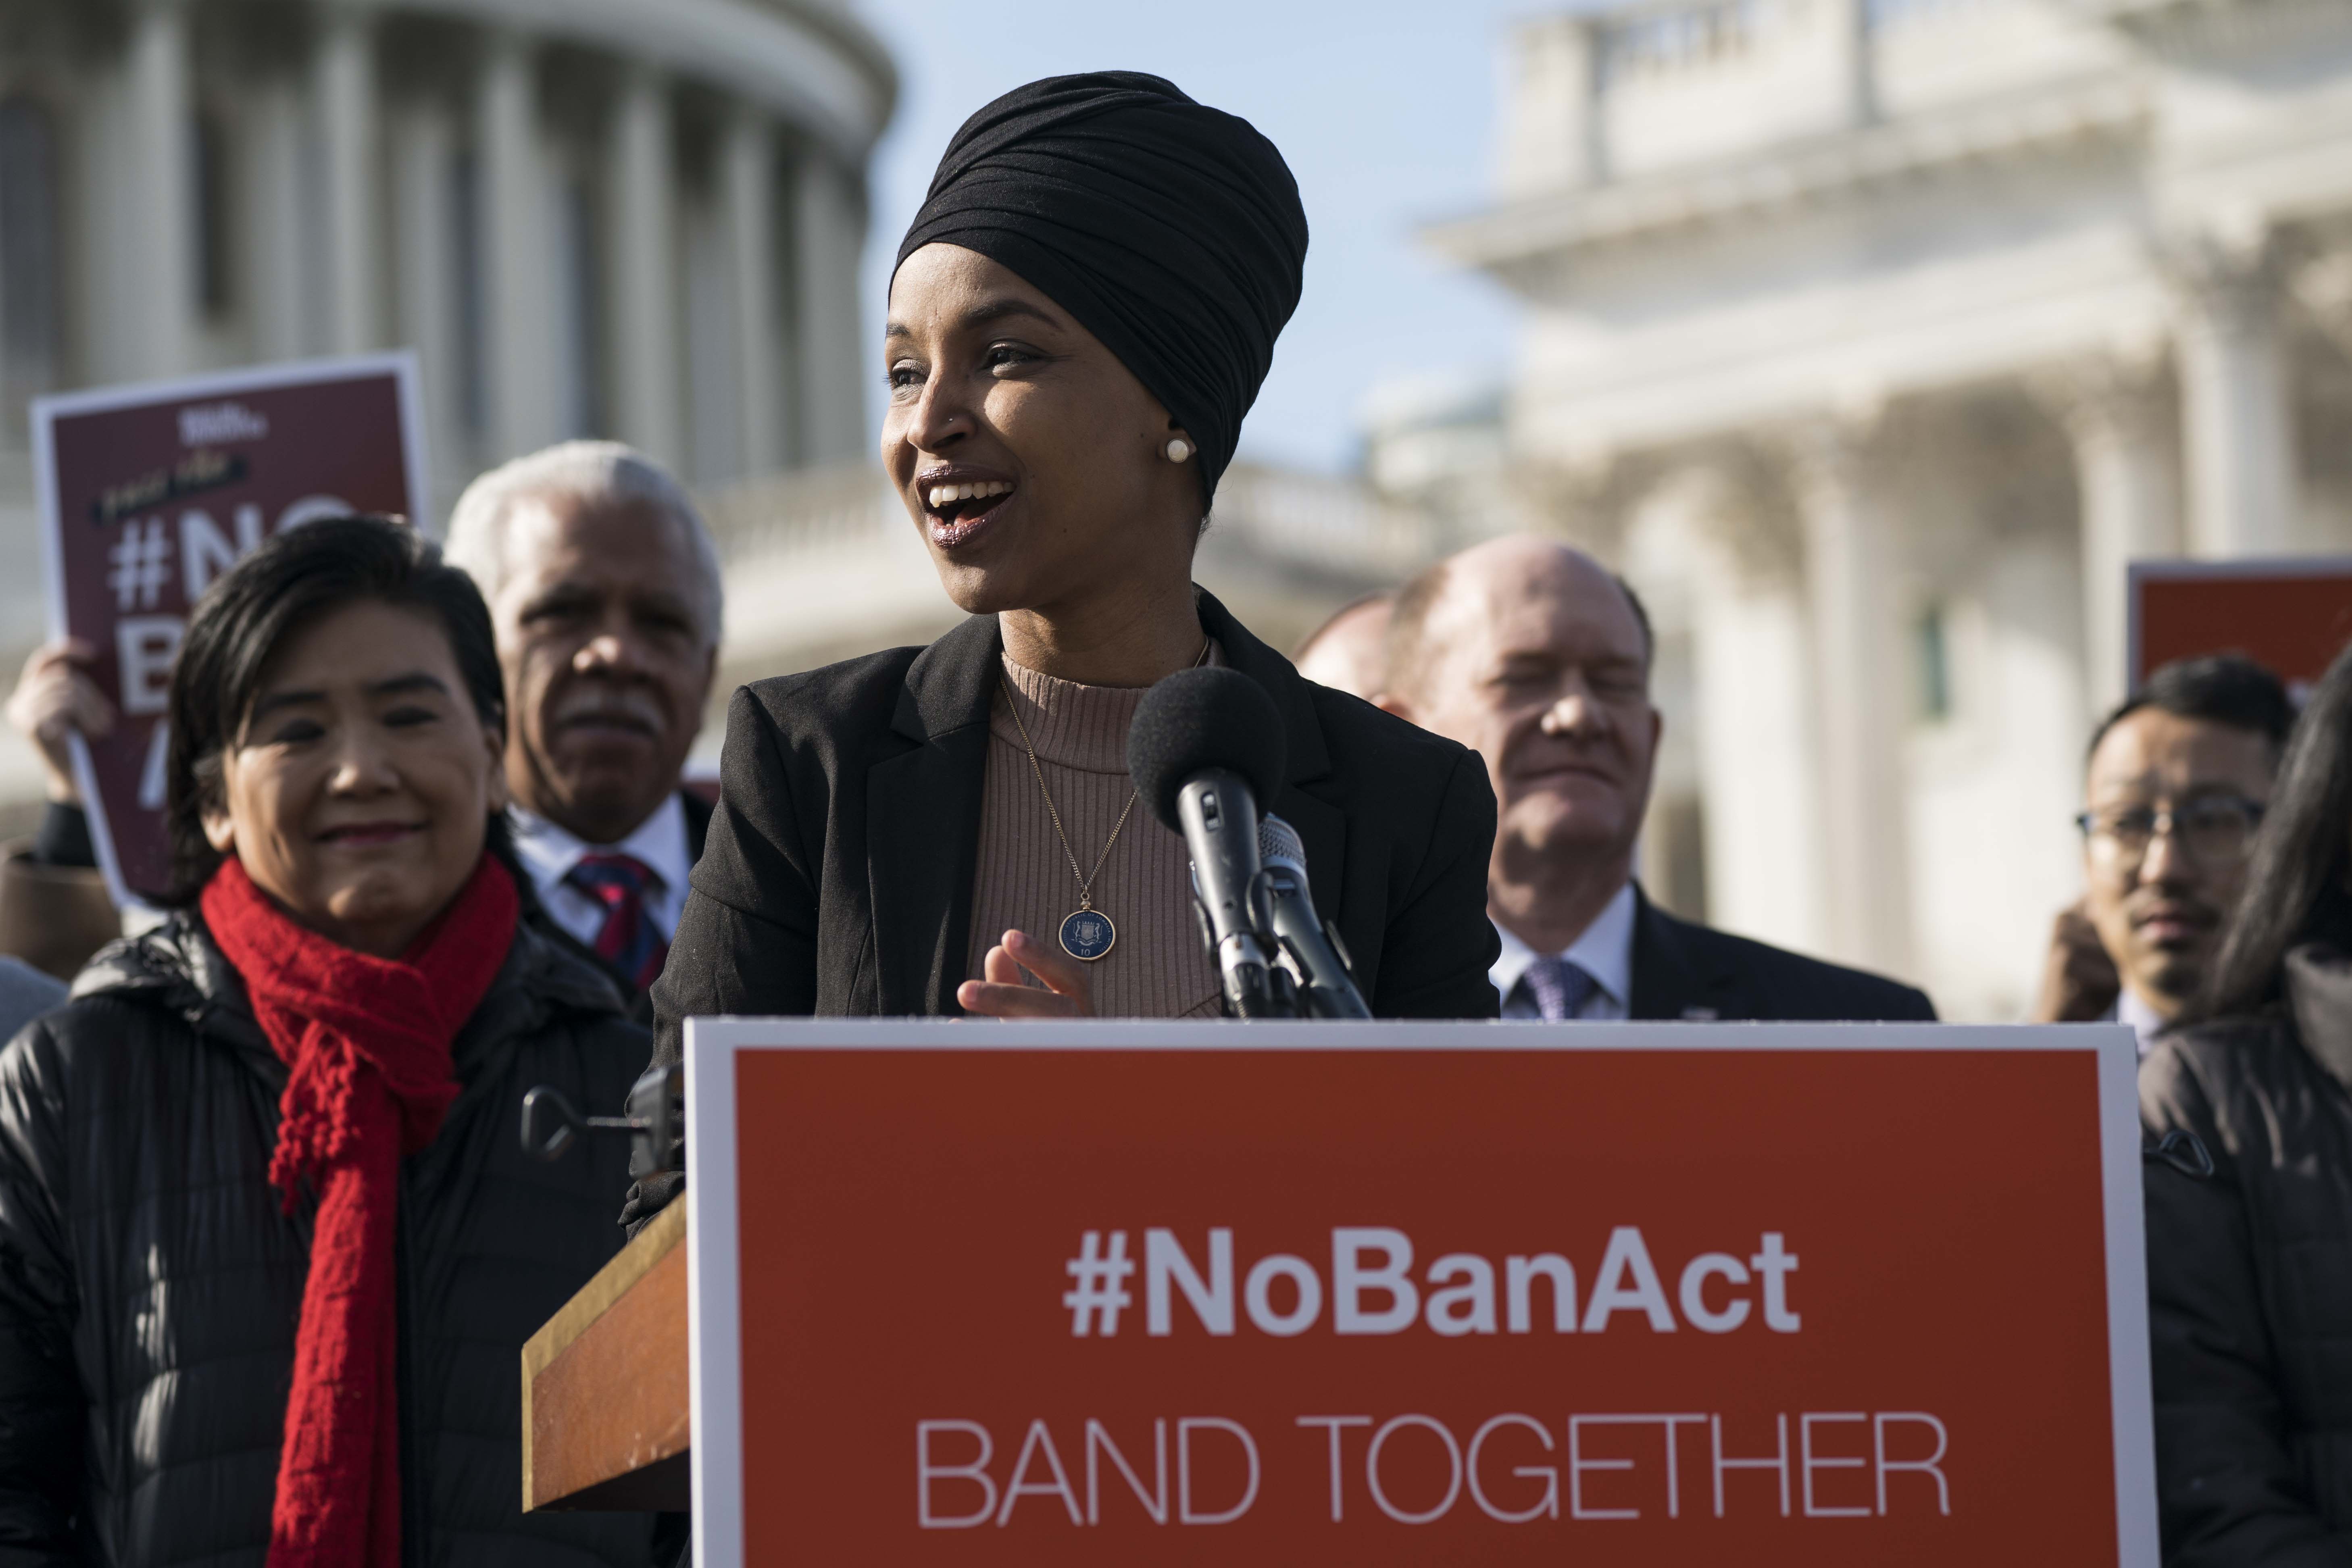 Congressional Democrats Hold Press Conference To Call For Passage Of NO BAN Act